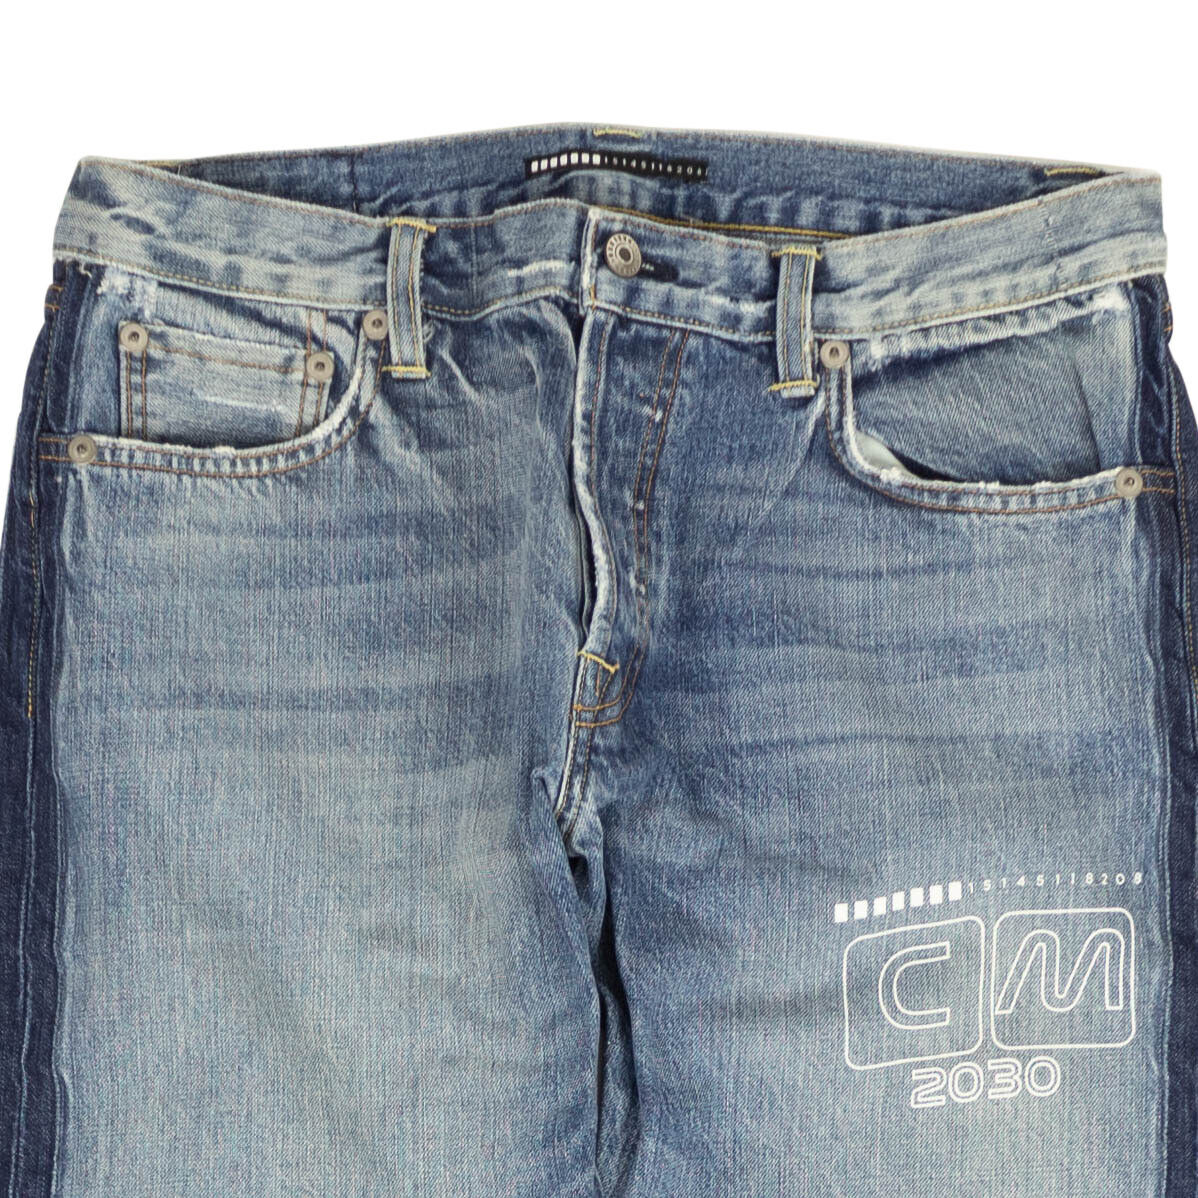 Visitor On Earth Washed Jeans - Blue